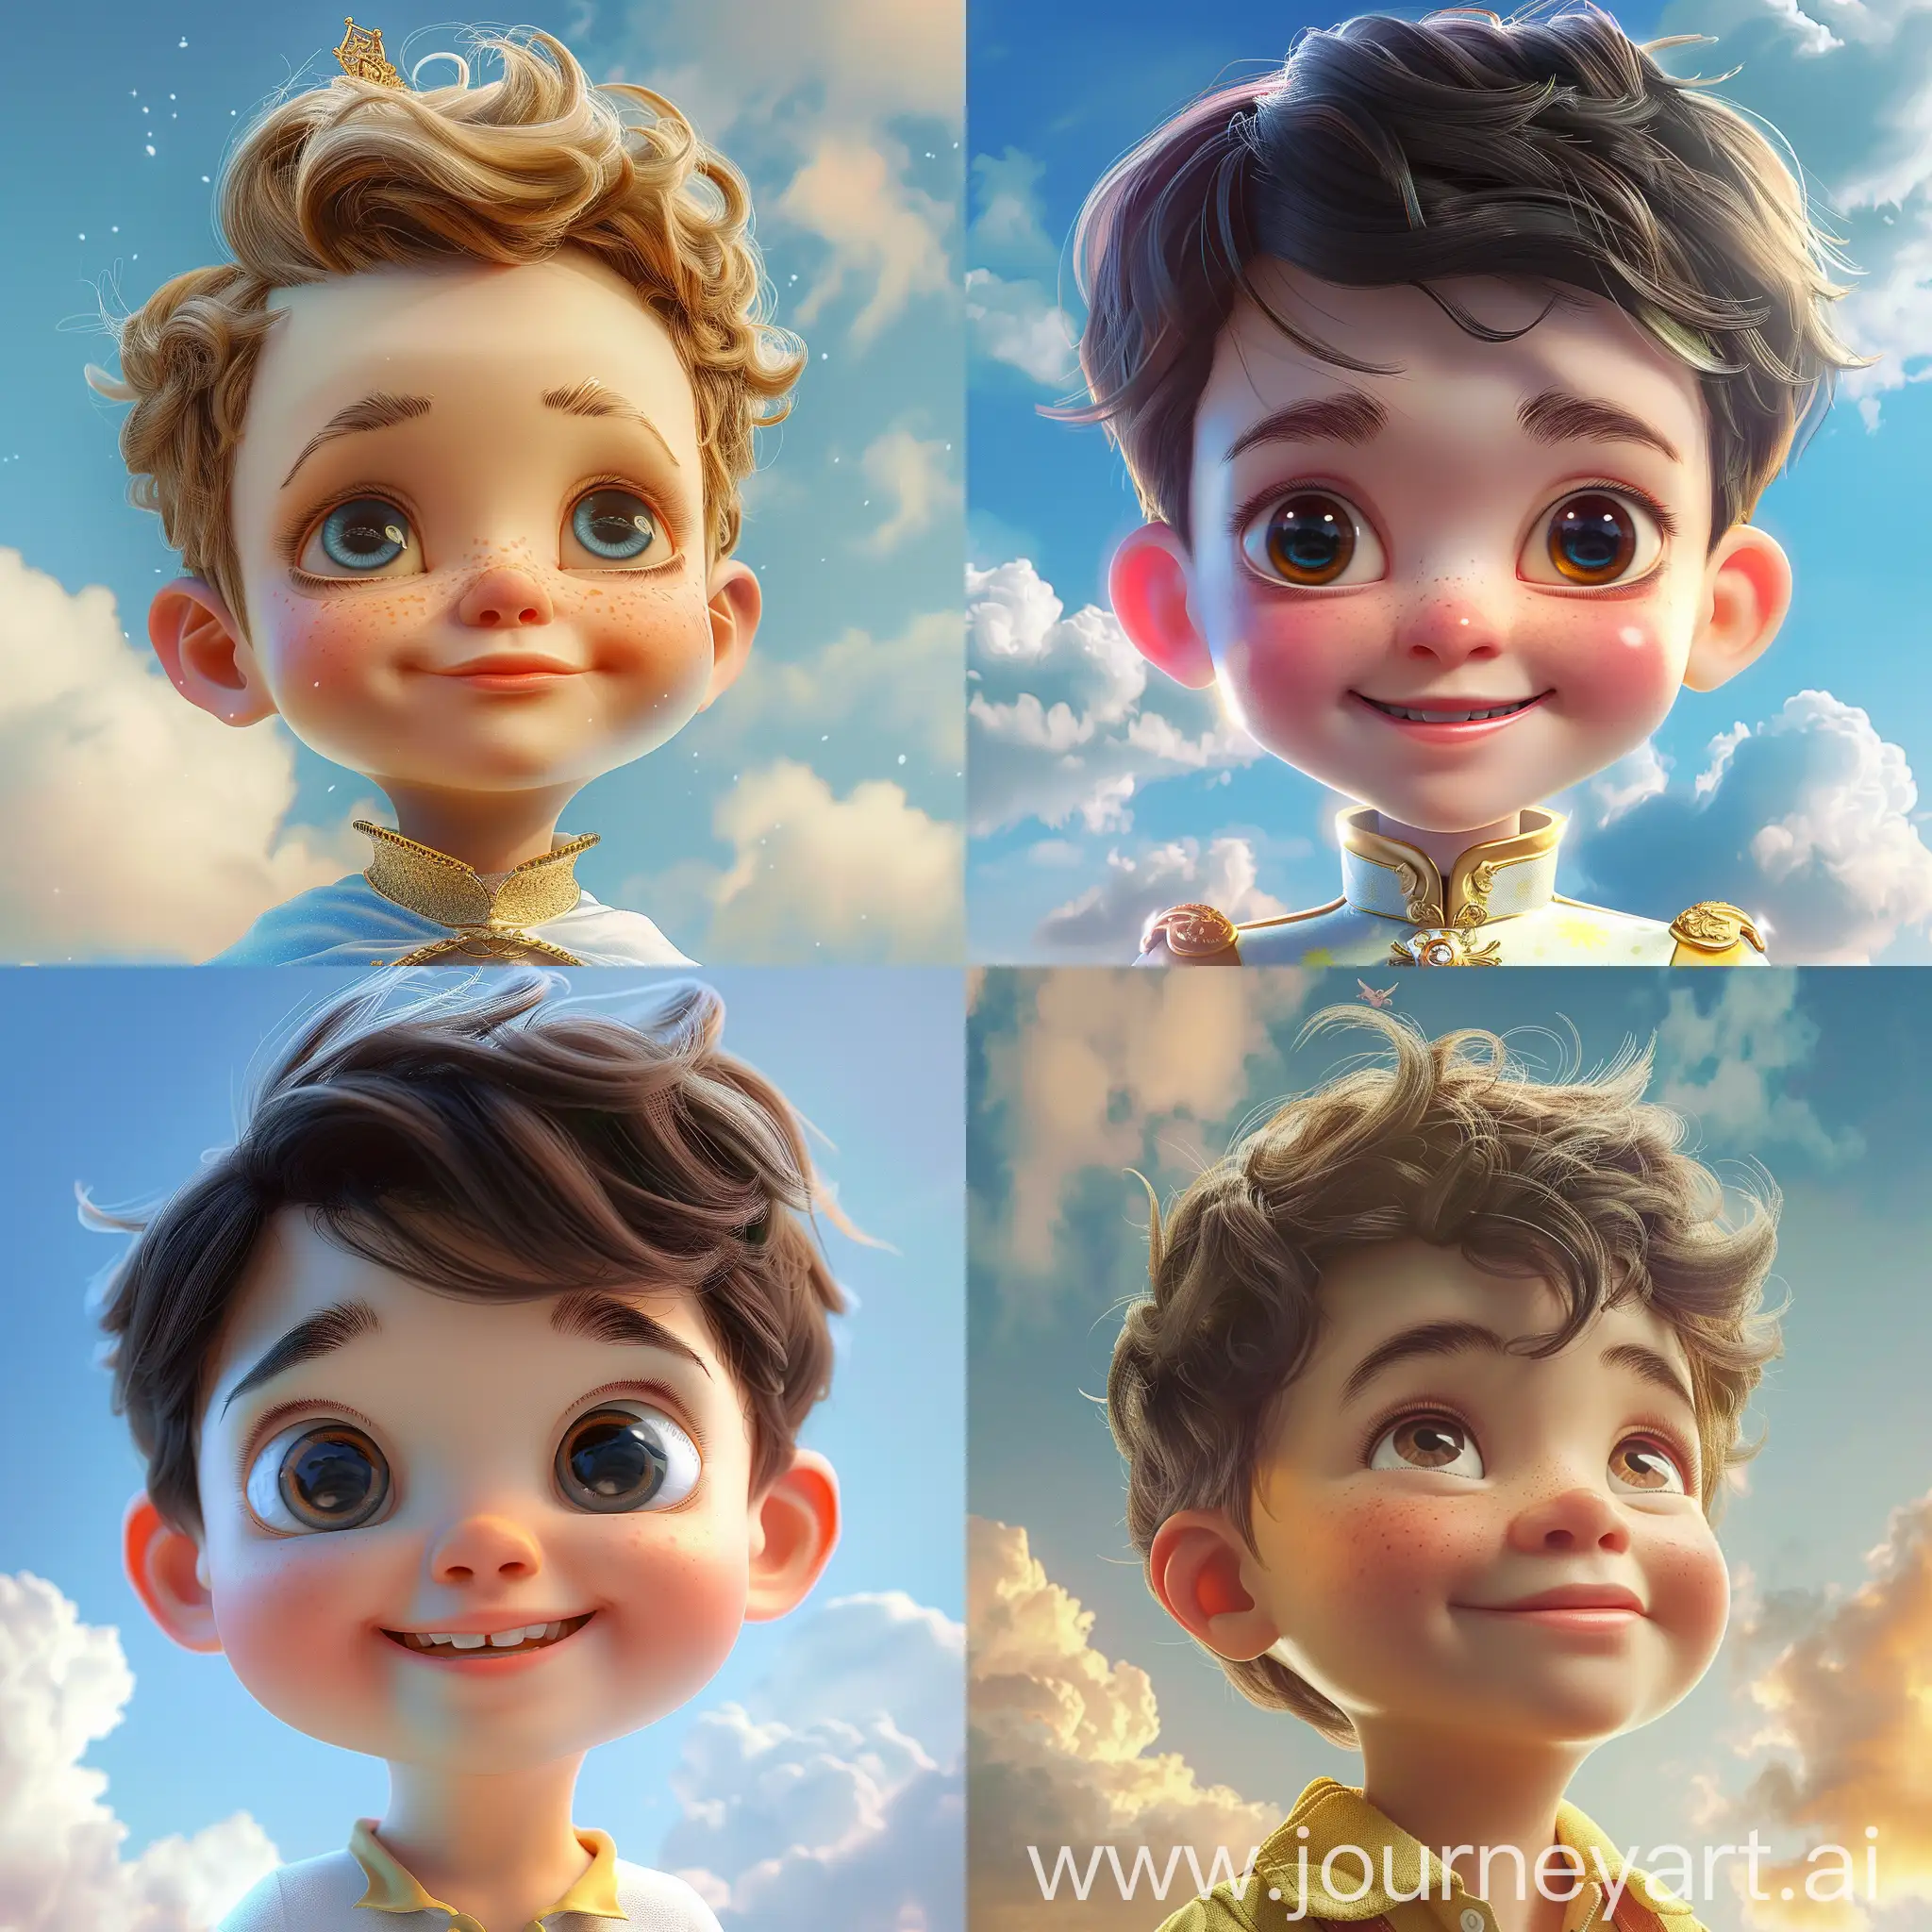 A young boy, Disney Prince, baby face, exquisite facial features, big eyes, high nose, smiling lips, fantastic style, vast sky, bold and colorful portraits, bayard wu, rtx, spotlight, game cg, 3D, 